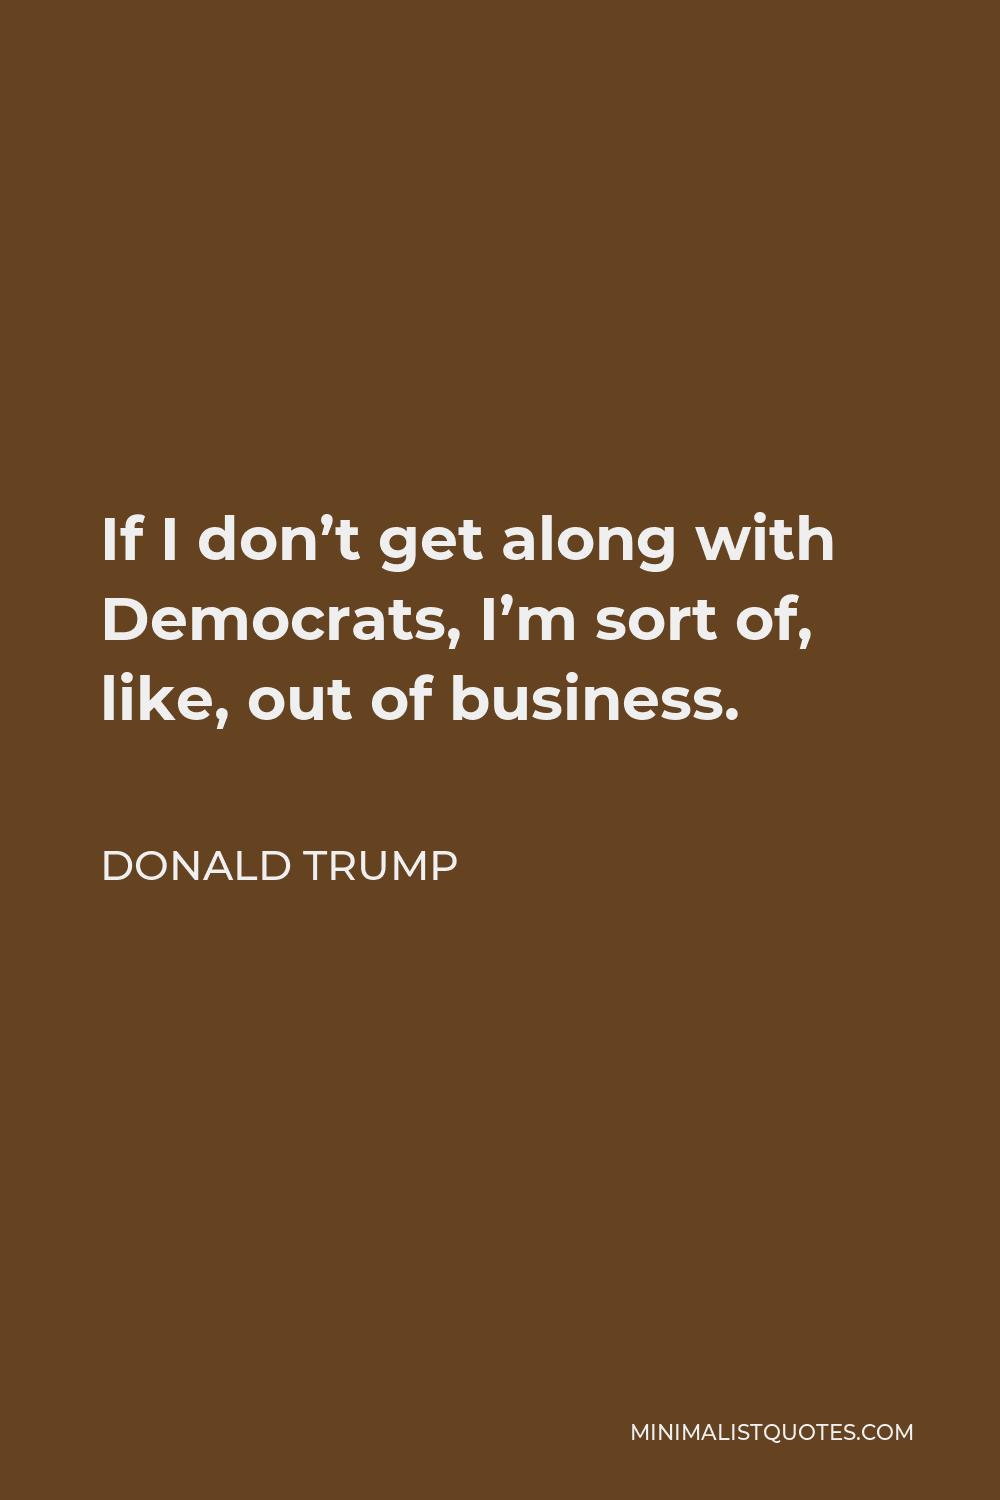 Donald Trump Quote - If I don’t get along with Democrats, I’m sort of, like, out of business.